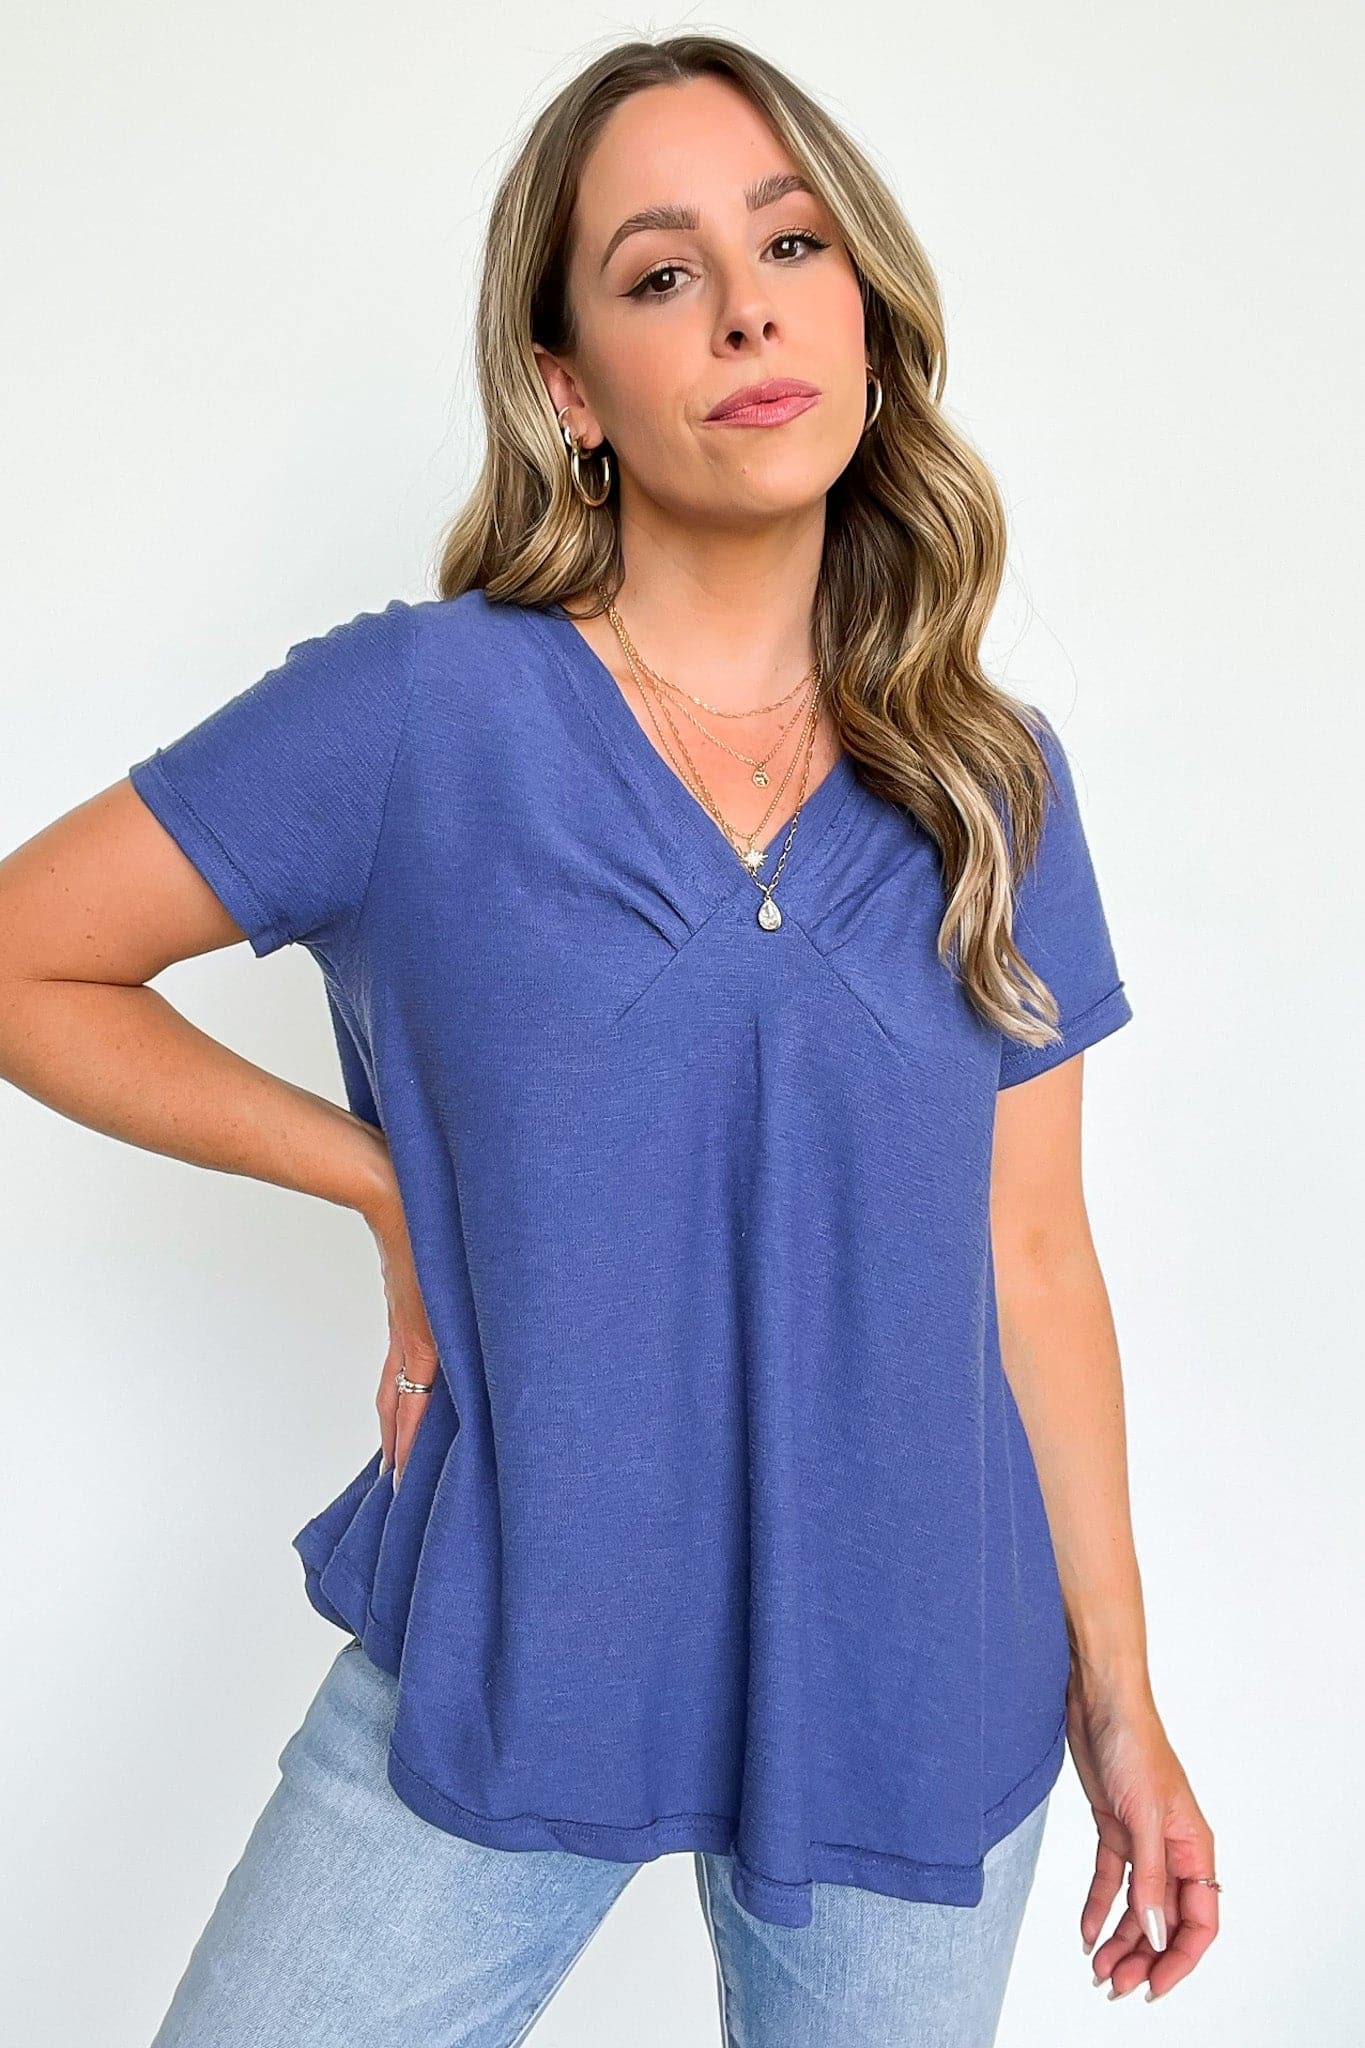  Audrie Short Sleeve V-Neck Top - FINAL SALE - Madison and Mallory